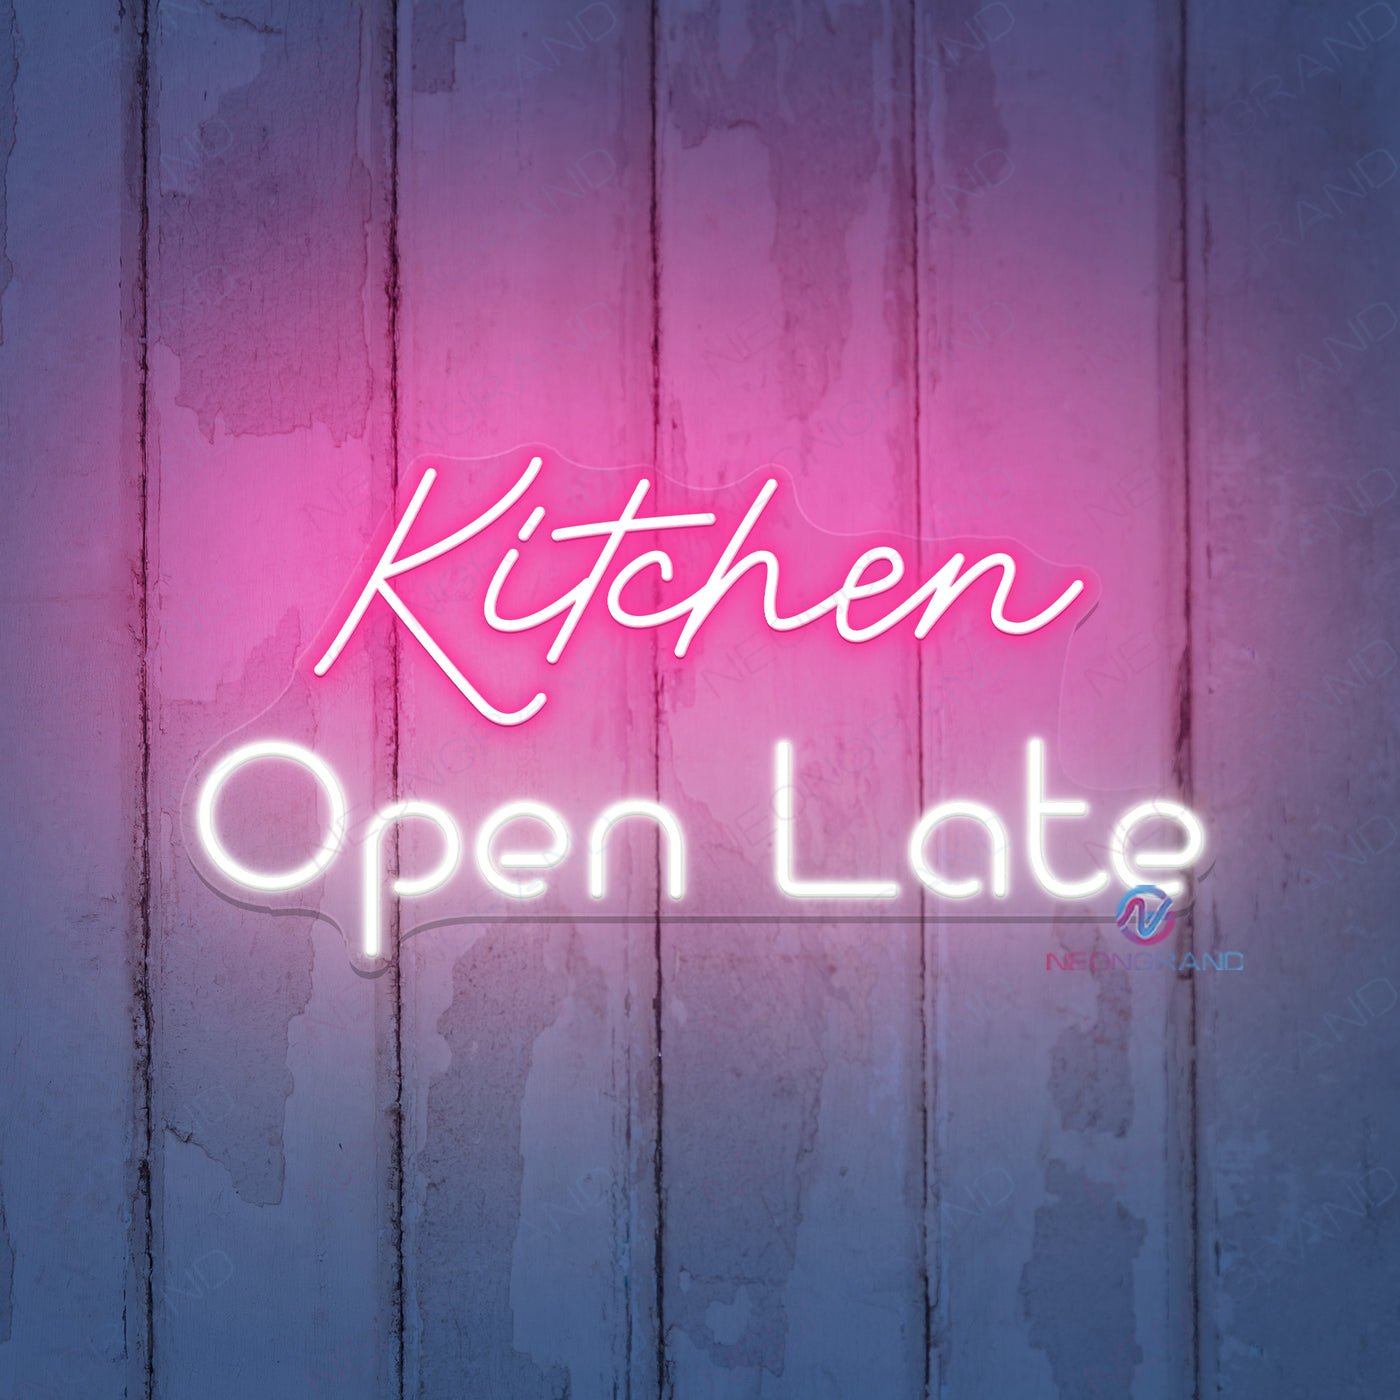 Kitchen Open Late Neon Sign Business Led Light